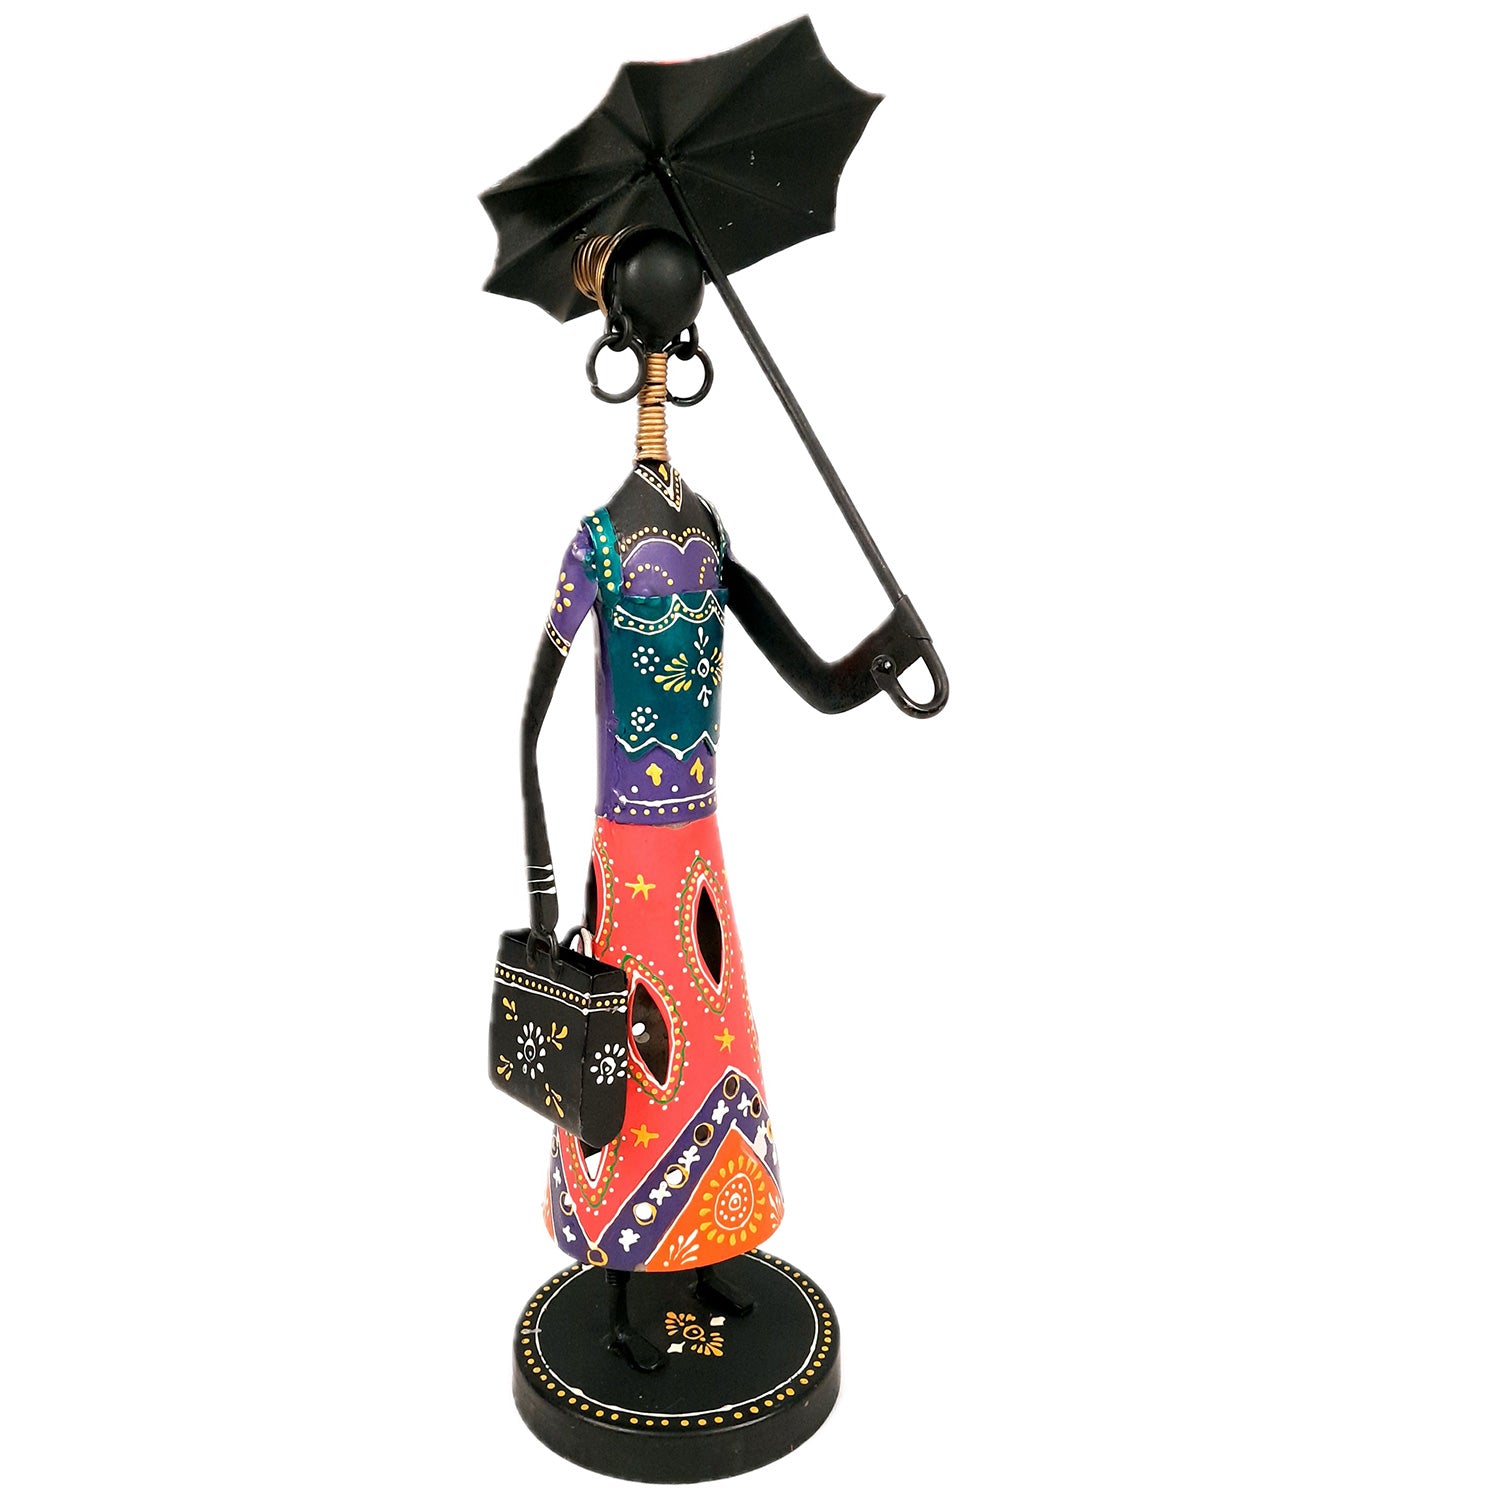 Girl Holding Umbrella Showpiece | Decorative Figurines - For Home, Table, Living Room & TV Unit| Show Piece For Office Desk Decor | Gifts For Her - 16 Inch - Apkamart